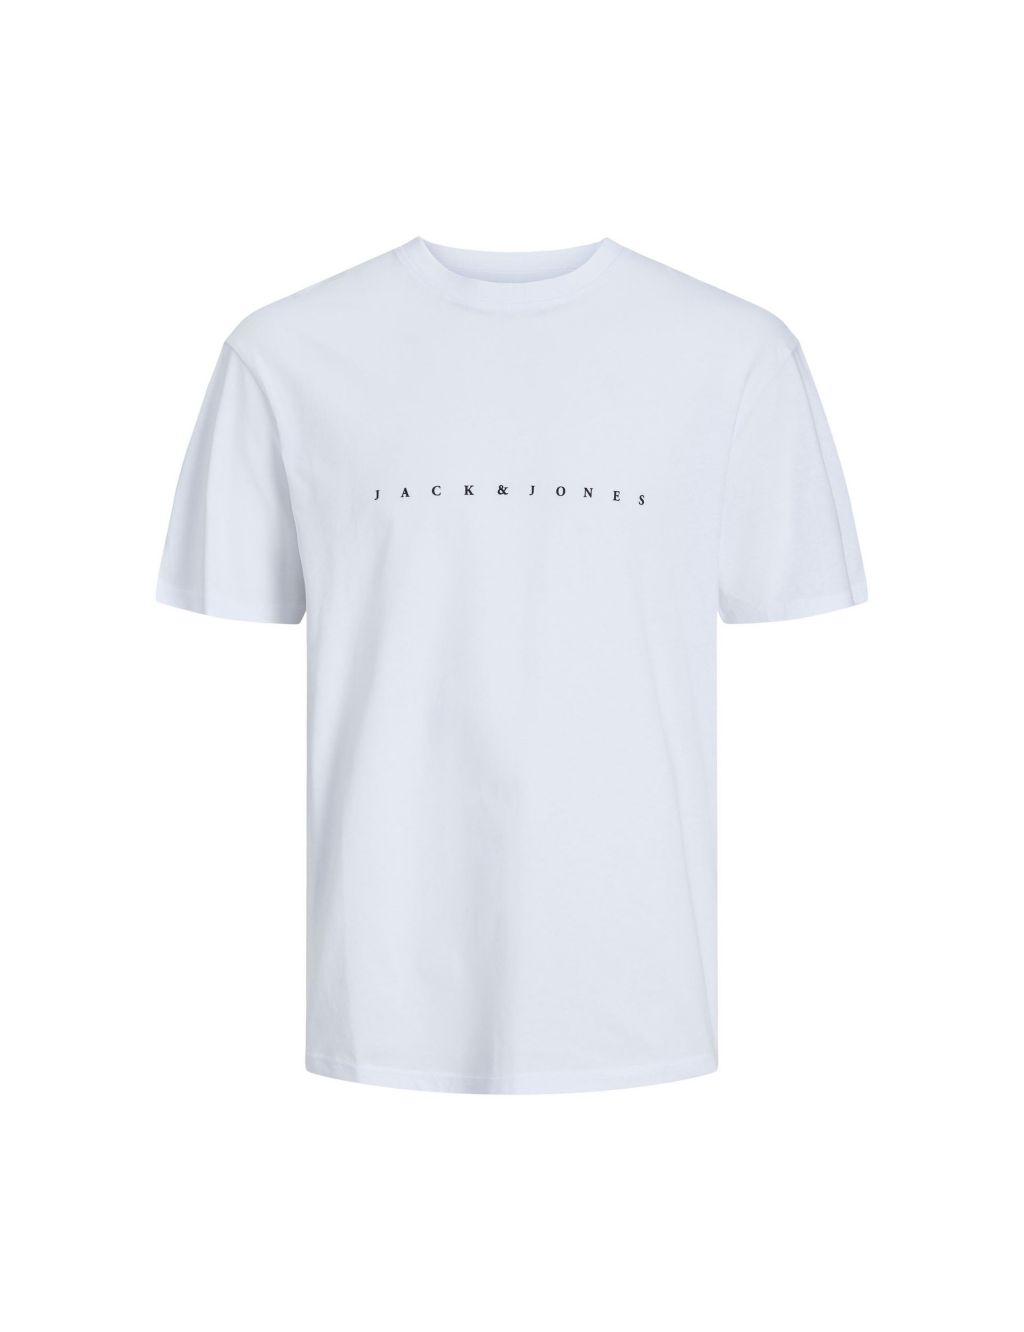 Relaxed Fit Pure Cotton Logo Print T-Shirt image 2